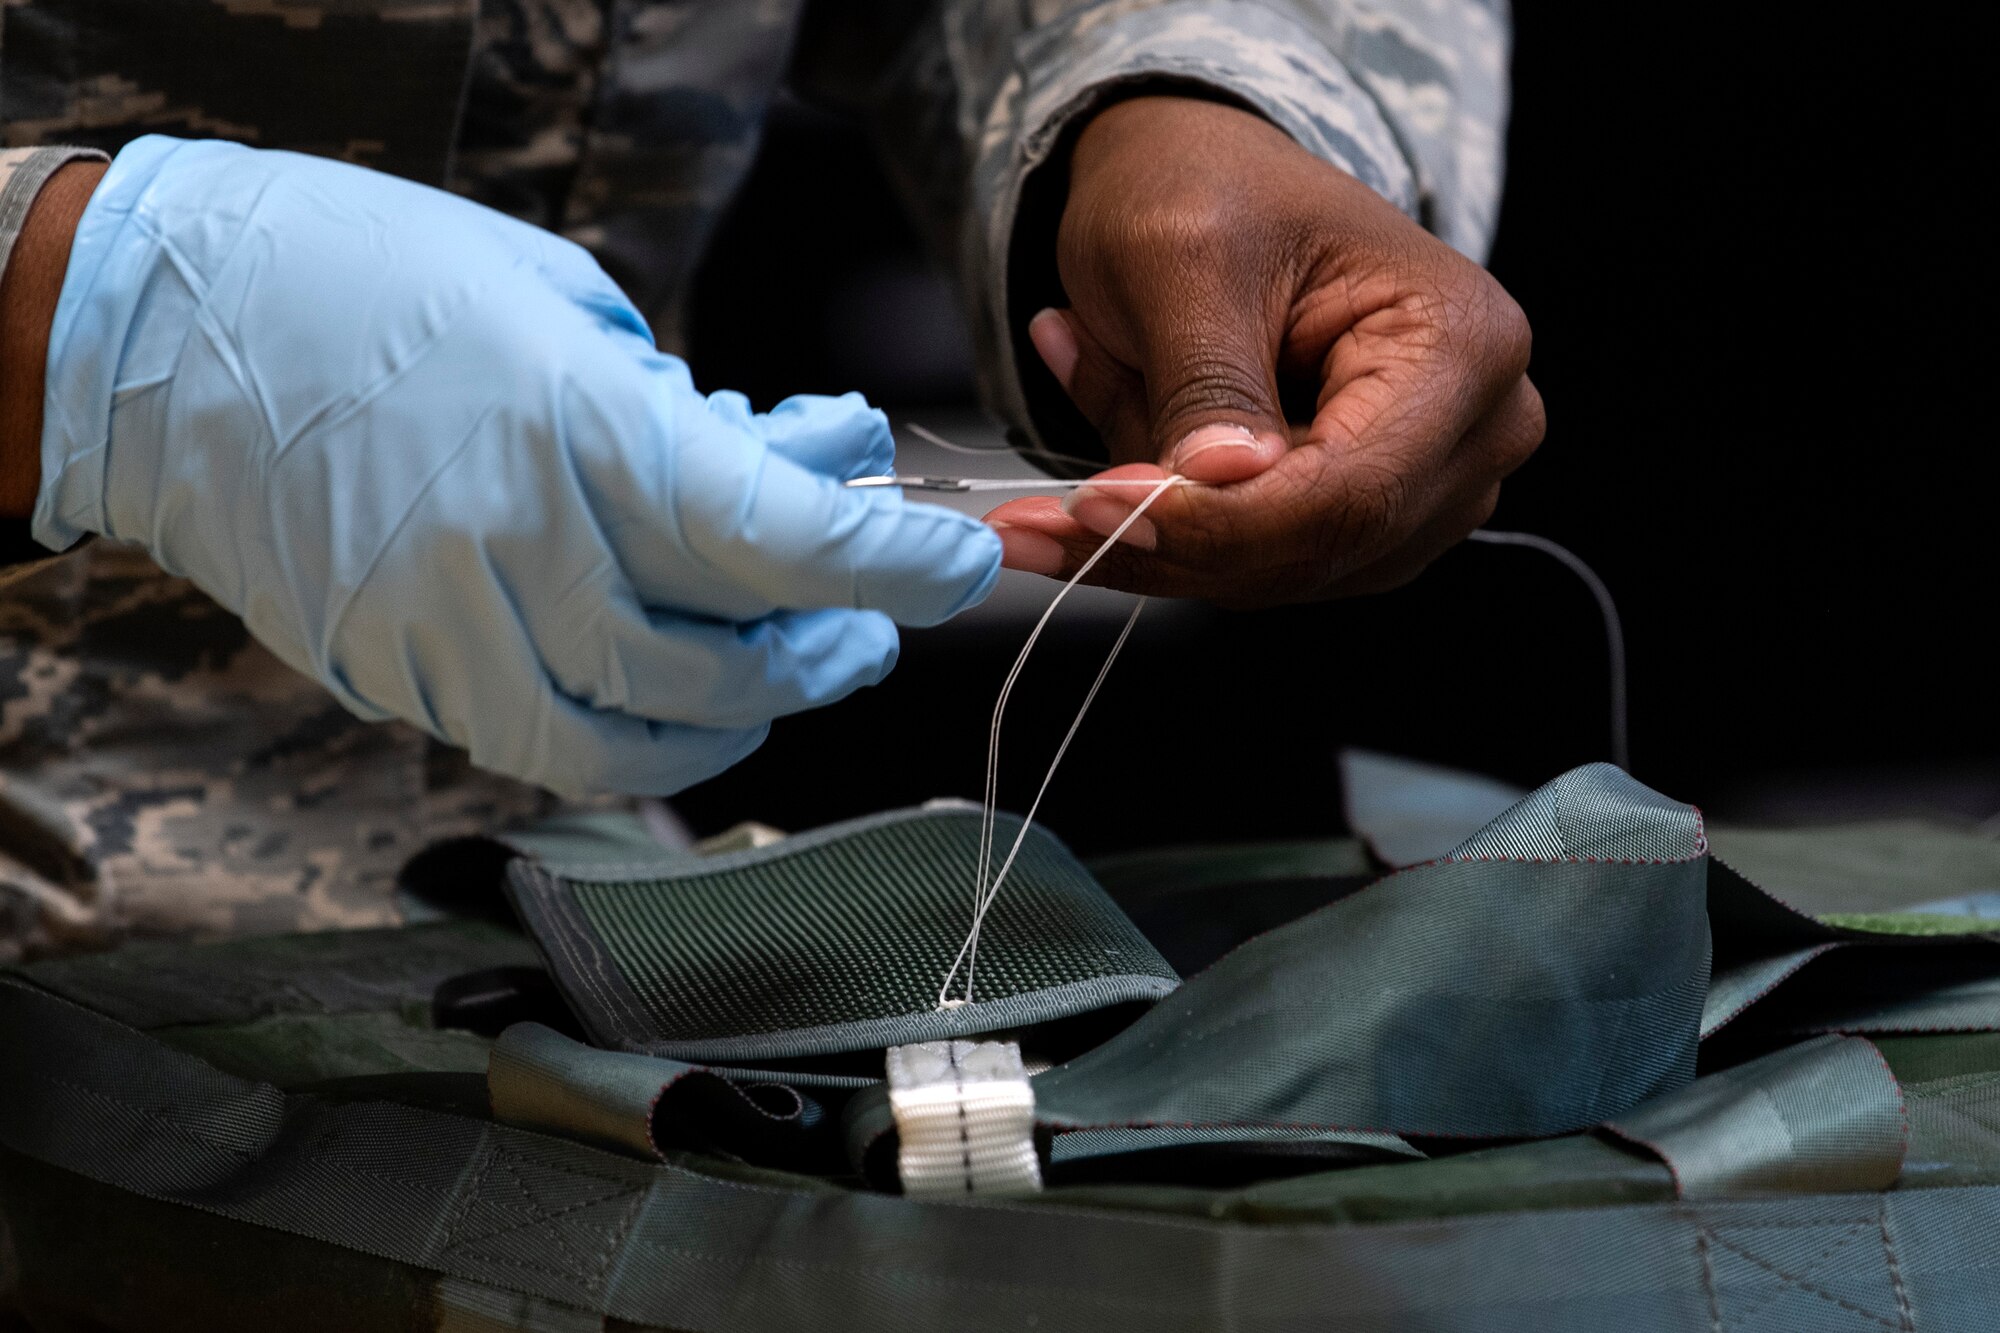 U.S. Air Force Senior Airman Roshelle Styles, 52nd Operations Support Squadron Aircrew Flight Equipment journeyman, sews tacking on an aircrew survival kit at Spangdahlem Air Base, Germany, March 4, 2020. Spangdahlem AFE Airmen prepare, inspect, and fix all the gear 480th Fighter Squadron pilots require. (U.S. Air Force photo by Senior Airman Valerie R. Seelye)